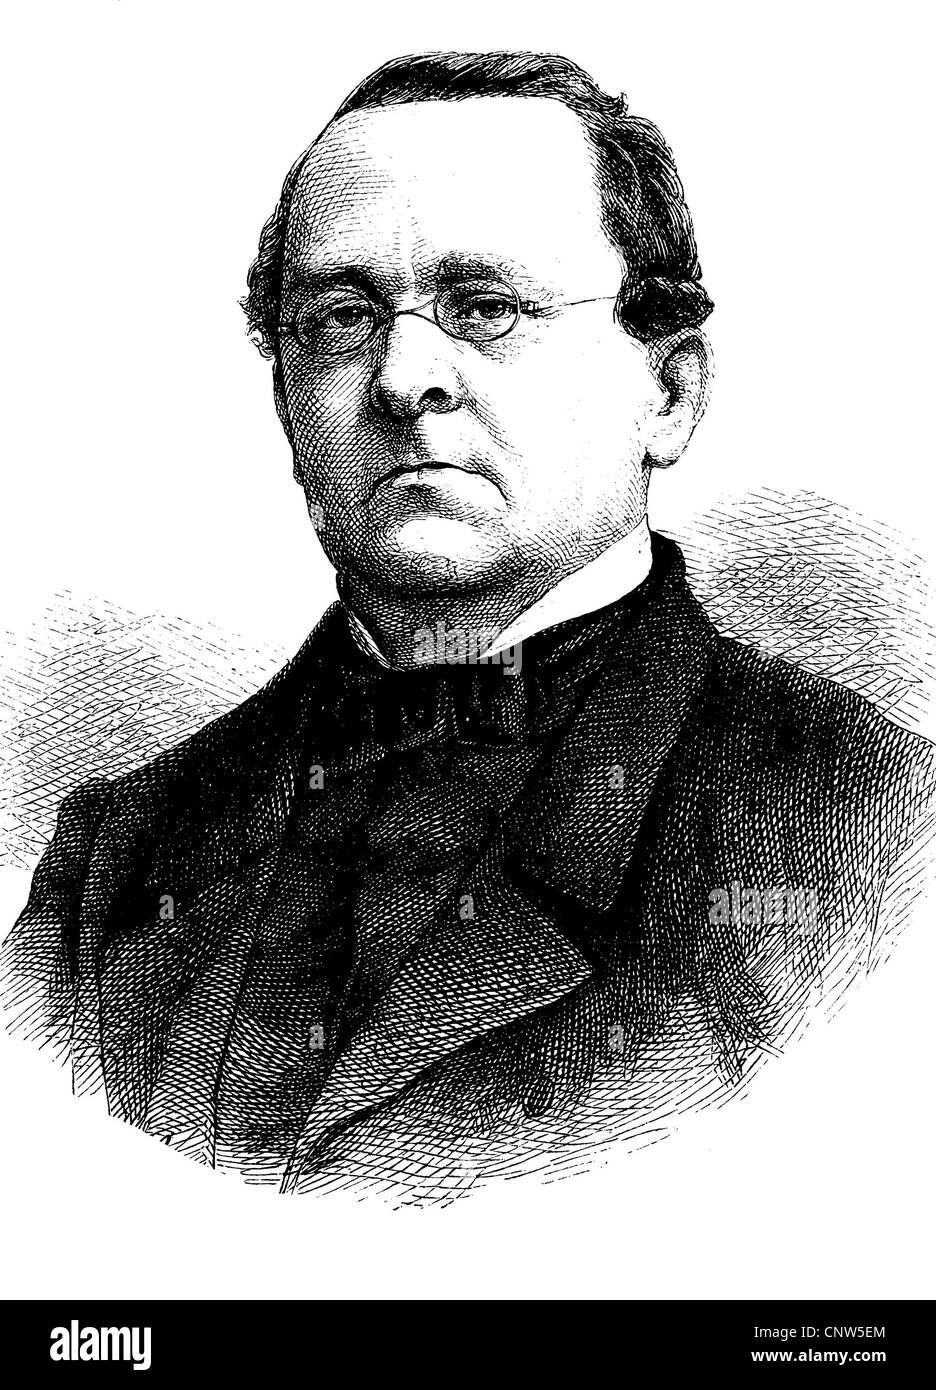 Anton Sommer, 1816 - 1888, Thuringian dialect poet, historical engraving, 1880 Stock Photo